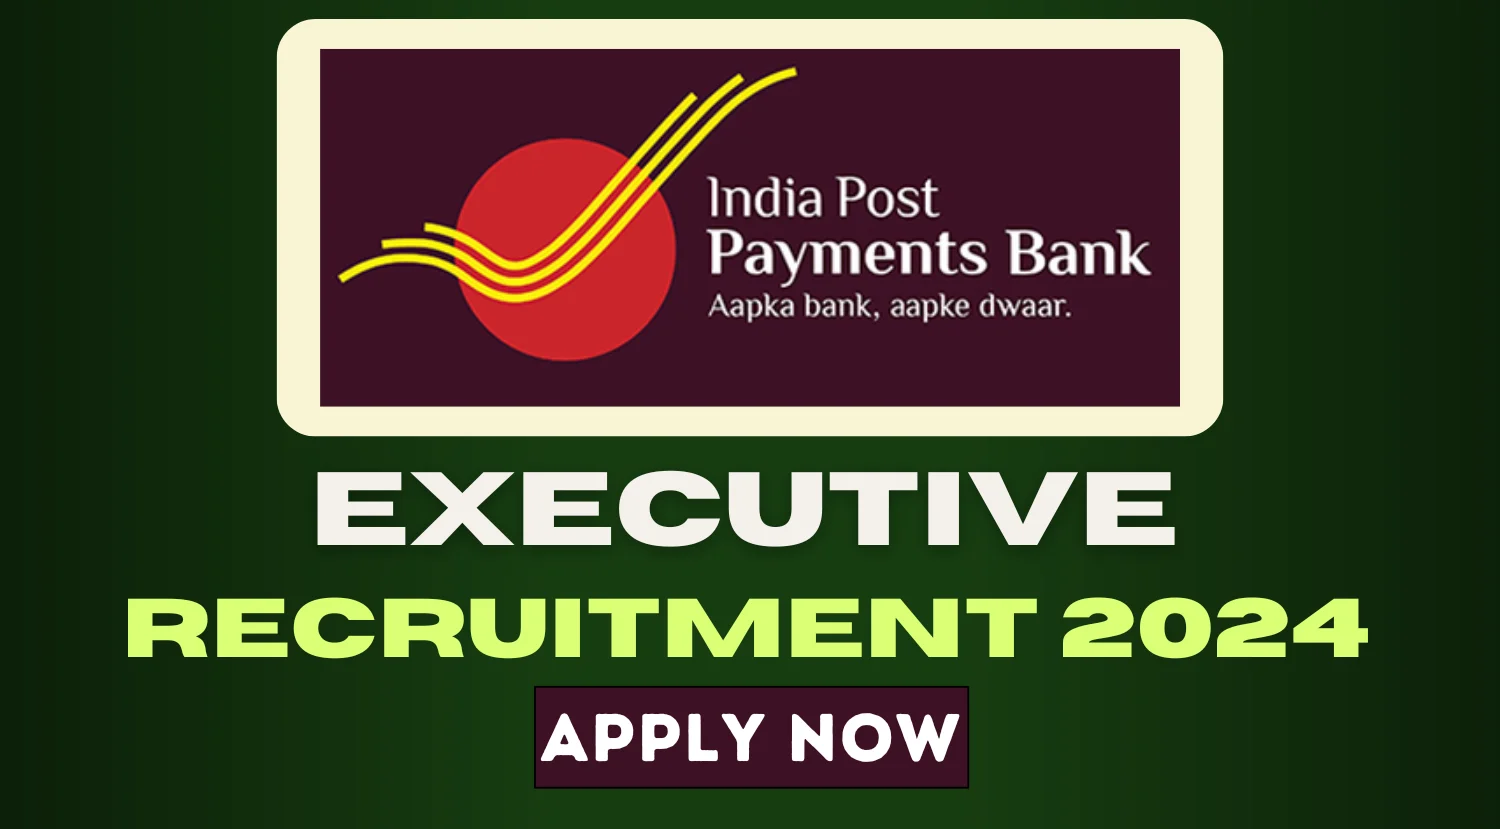 IPPB Recruitment 2024 Notification Out, Apply Now for Various for Executive Vacancies